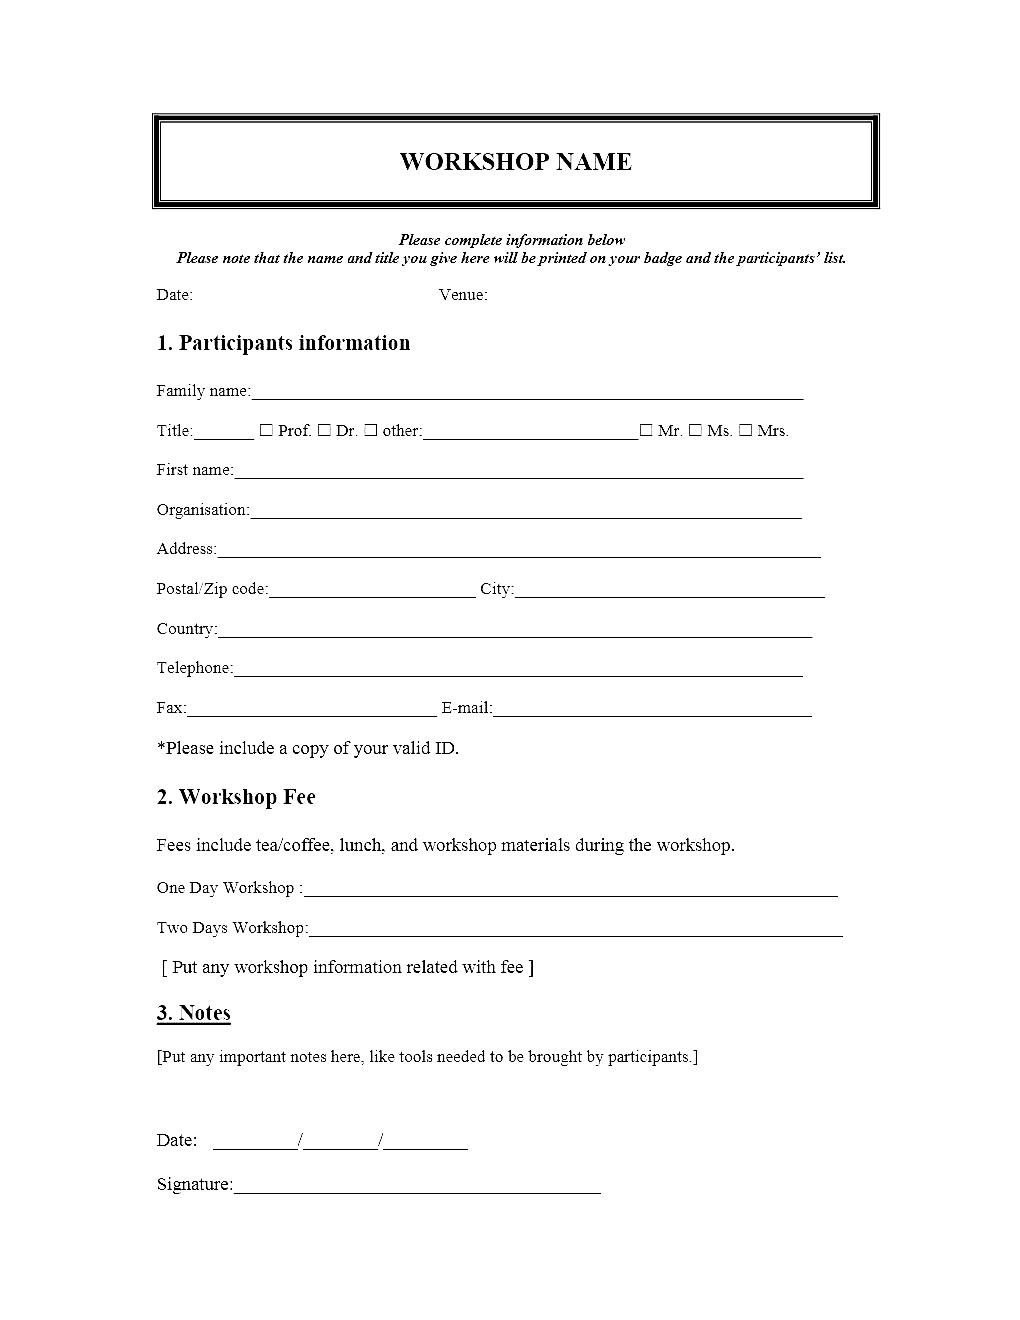 Event Registration Form Template Microsoft Word  Besttemplate inside Seminar Registration Form Template Word